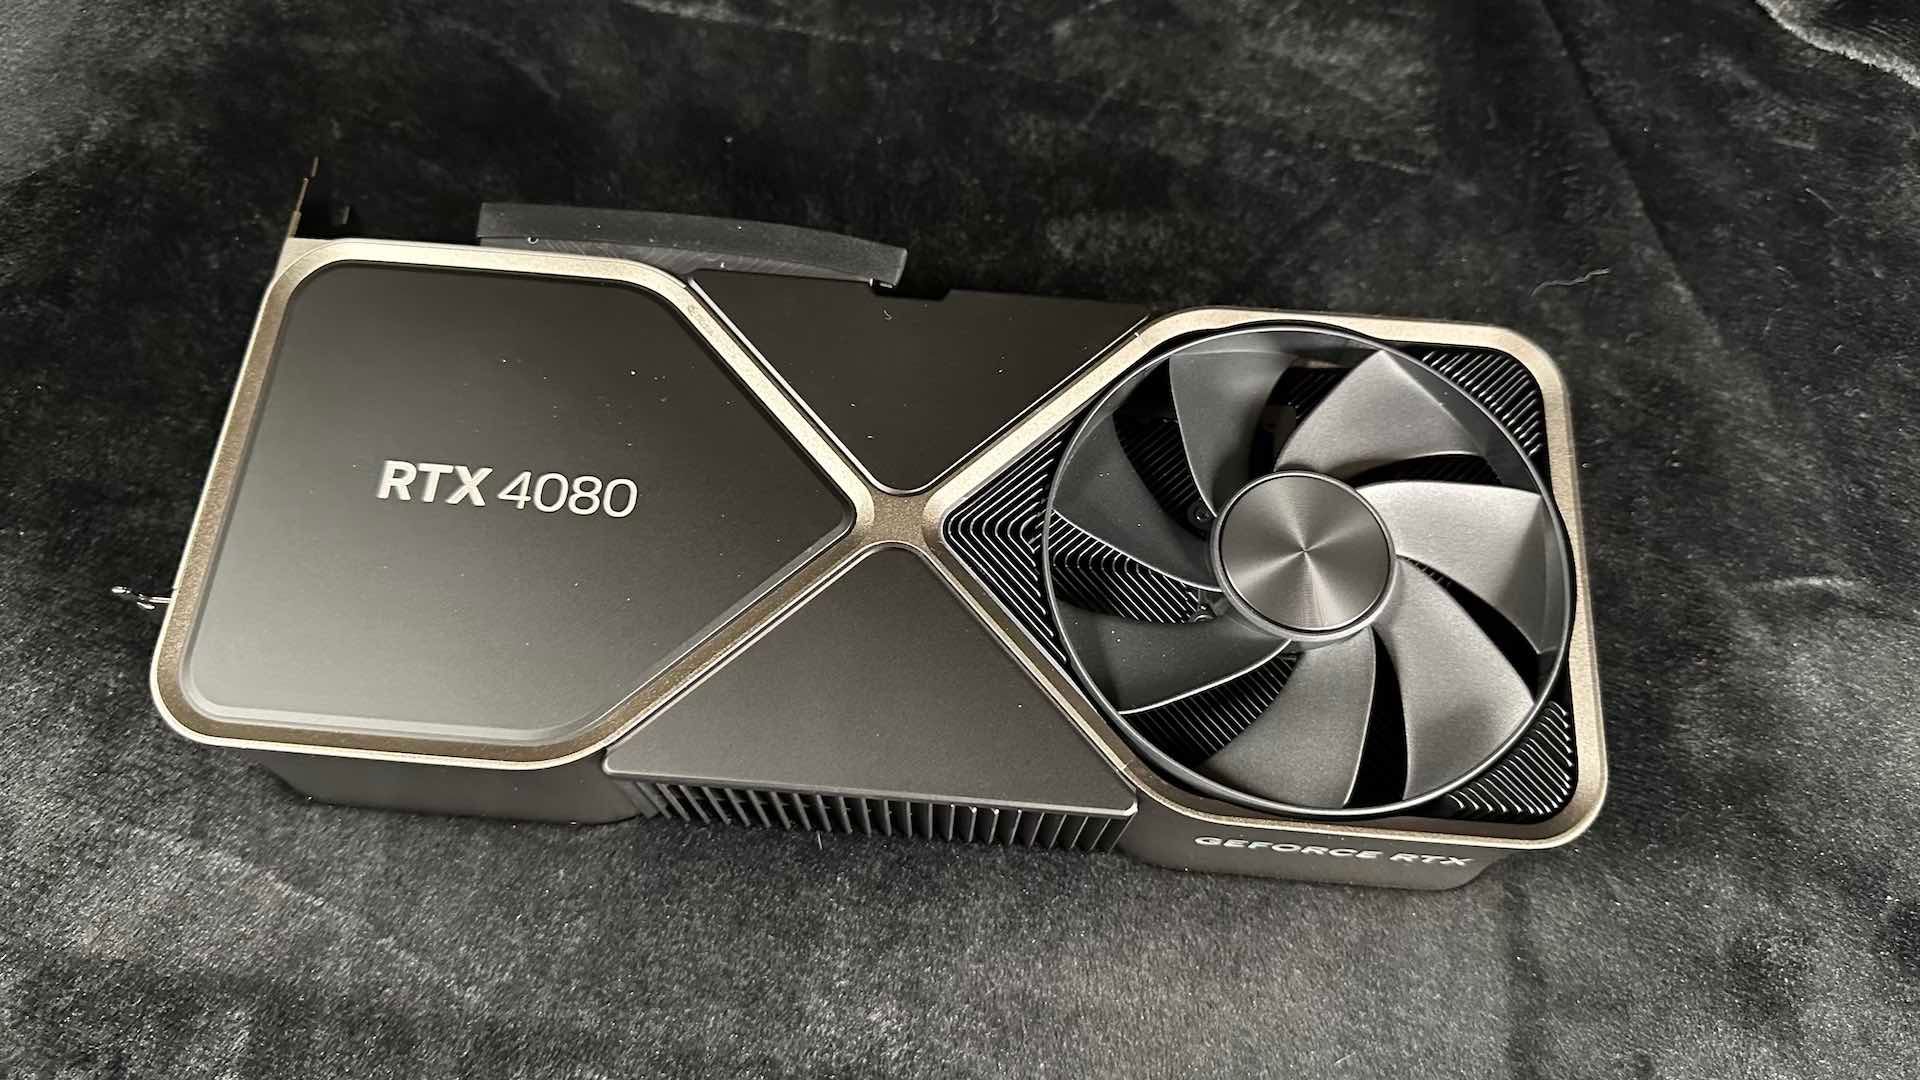 RTX 4080 Founder's Edition front